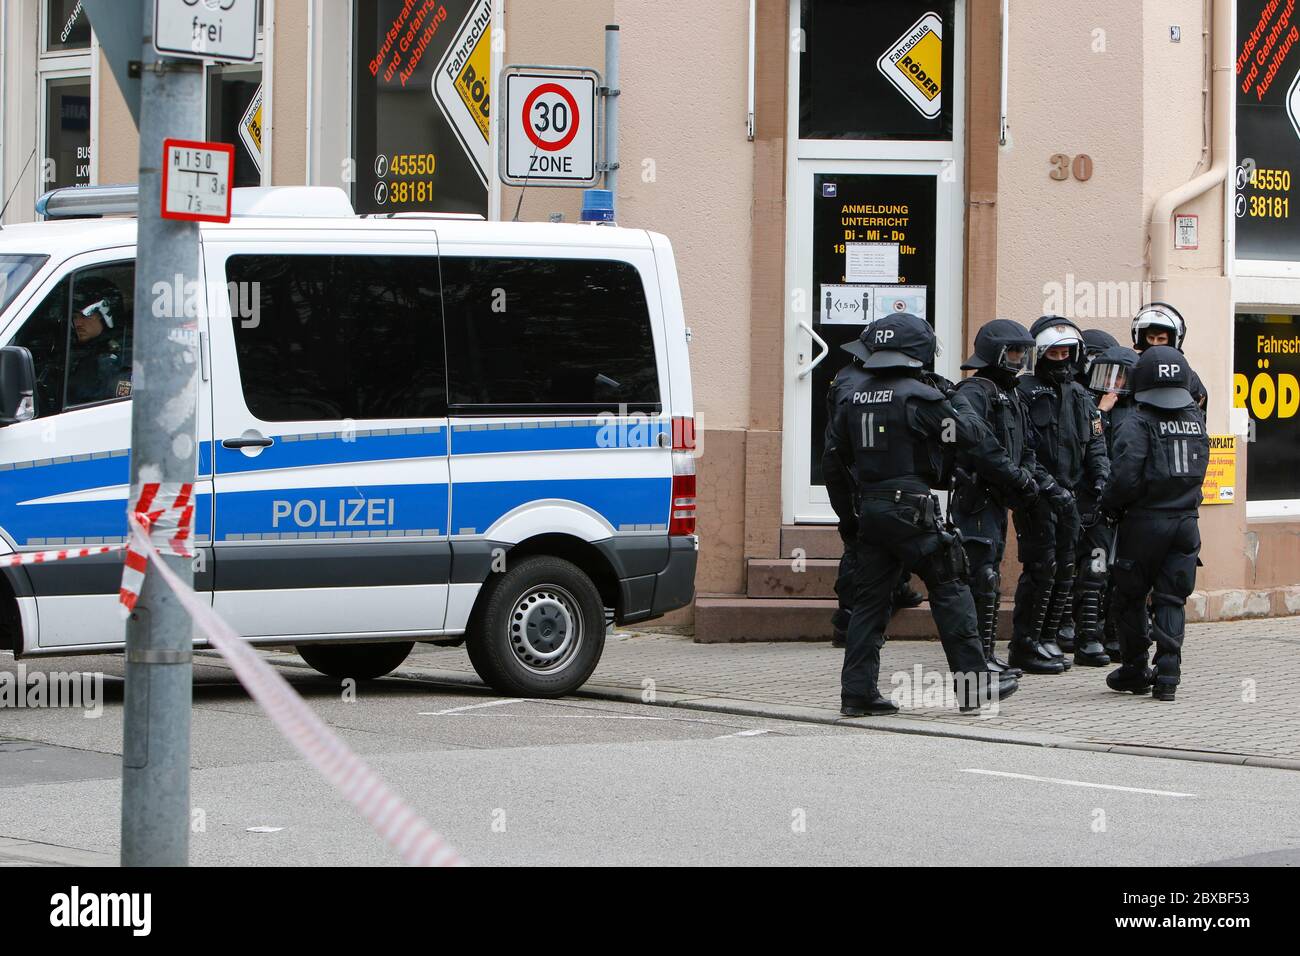 Worms, Germany. 6th June 2020. The police shows a heavy presence in the city centre of Worms. Around 50 right-wing protesters marched through the city centre of Worms for the 12. and last 'Day of the German Future’. The march was cut short due to several hundred counter protesters who blocked the  path of the right-wing march. The march was a yearly right-wing event in different German city that drew over 1000 protesters at its high-point. Stock Photo